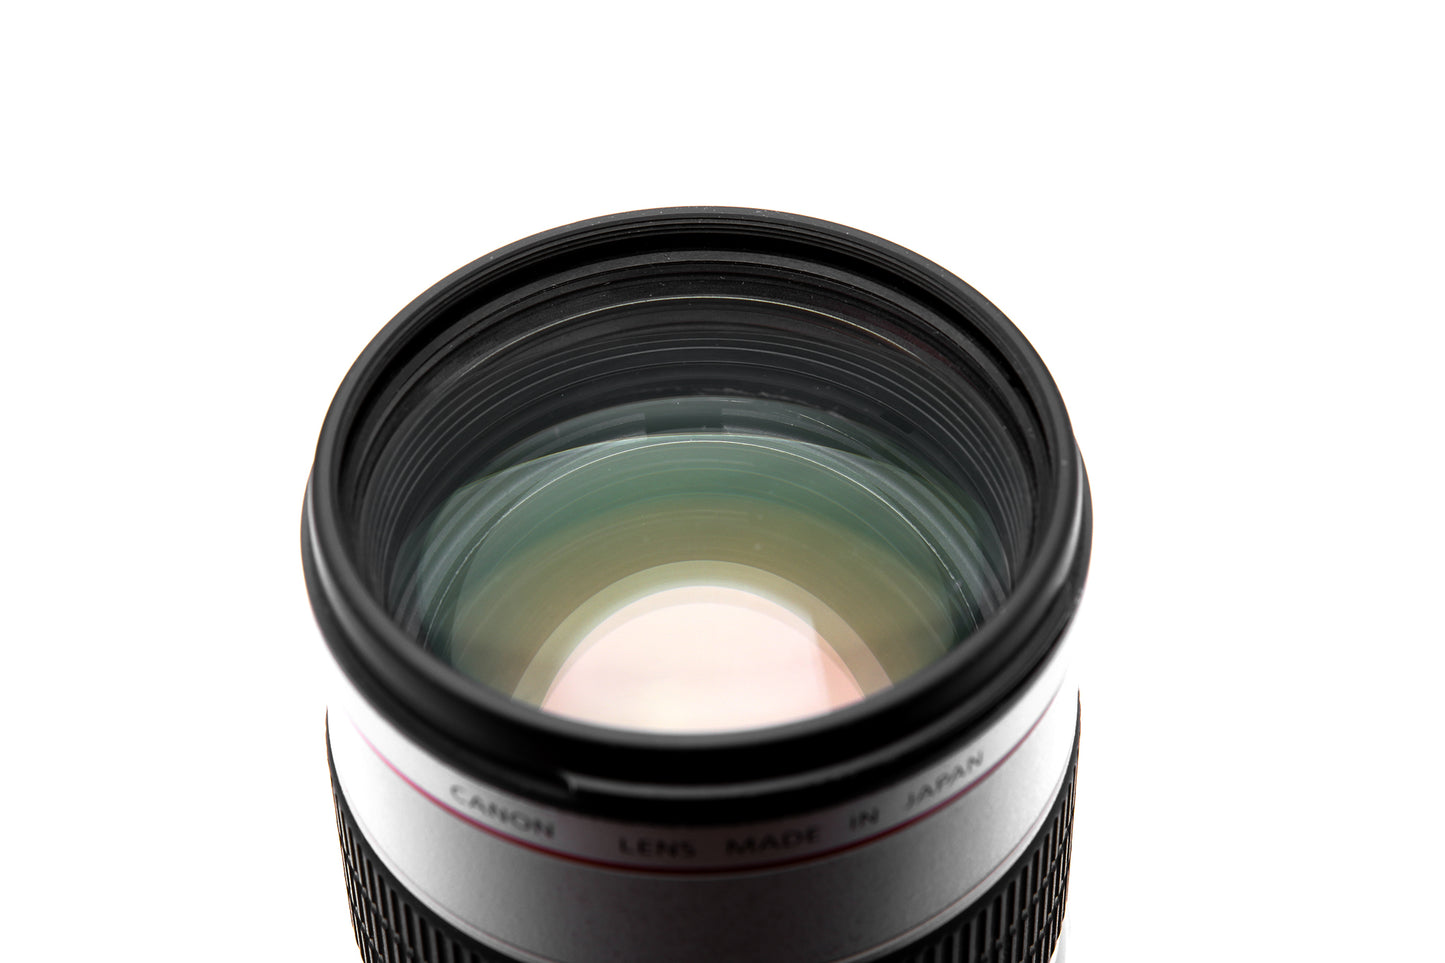 USED Canon 70-200 f2.8 i IS USM Lens